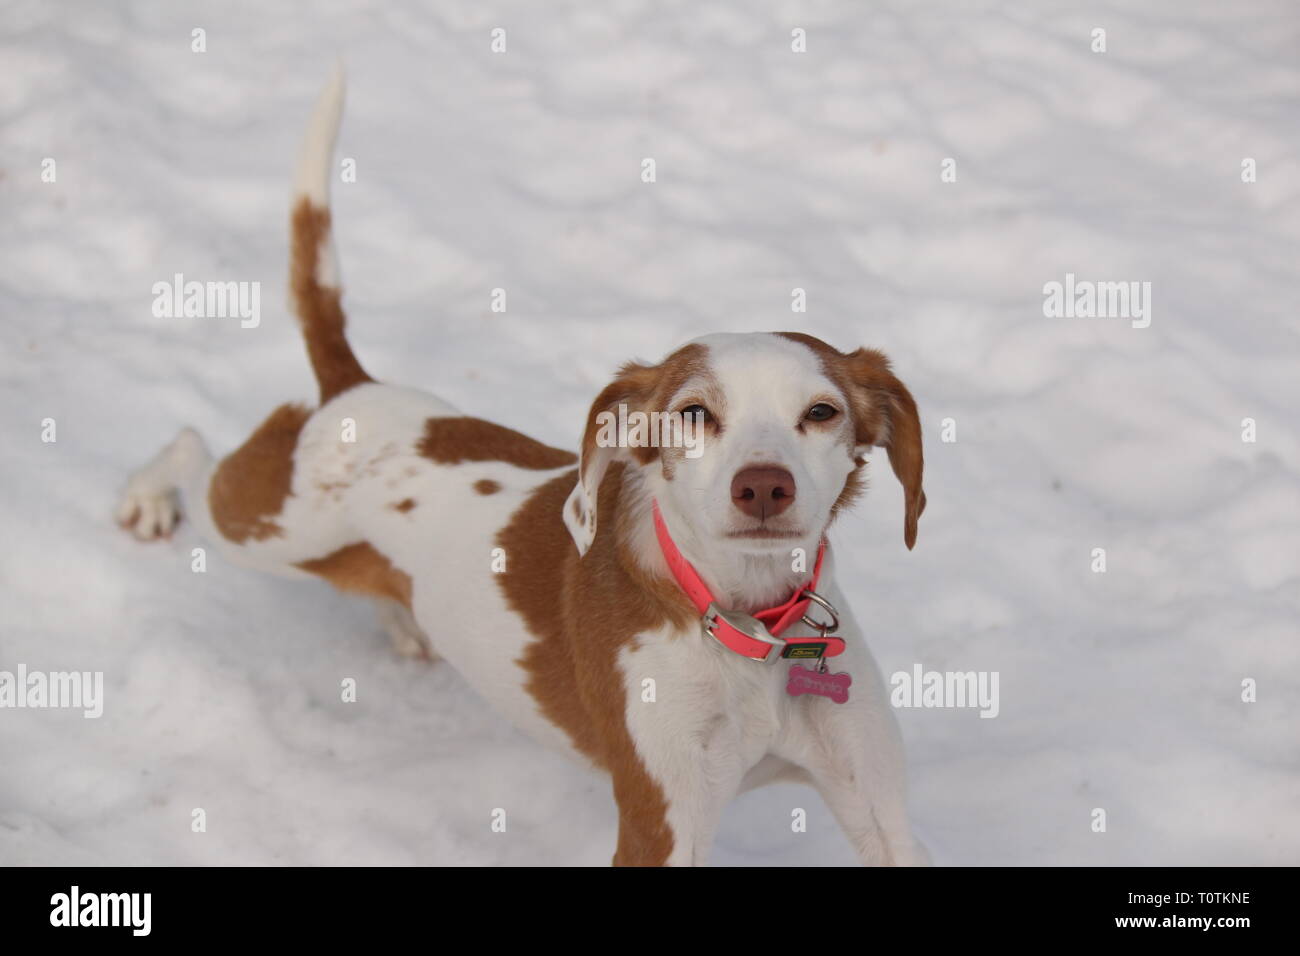 stretching dog in snow Stock Photo